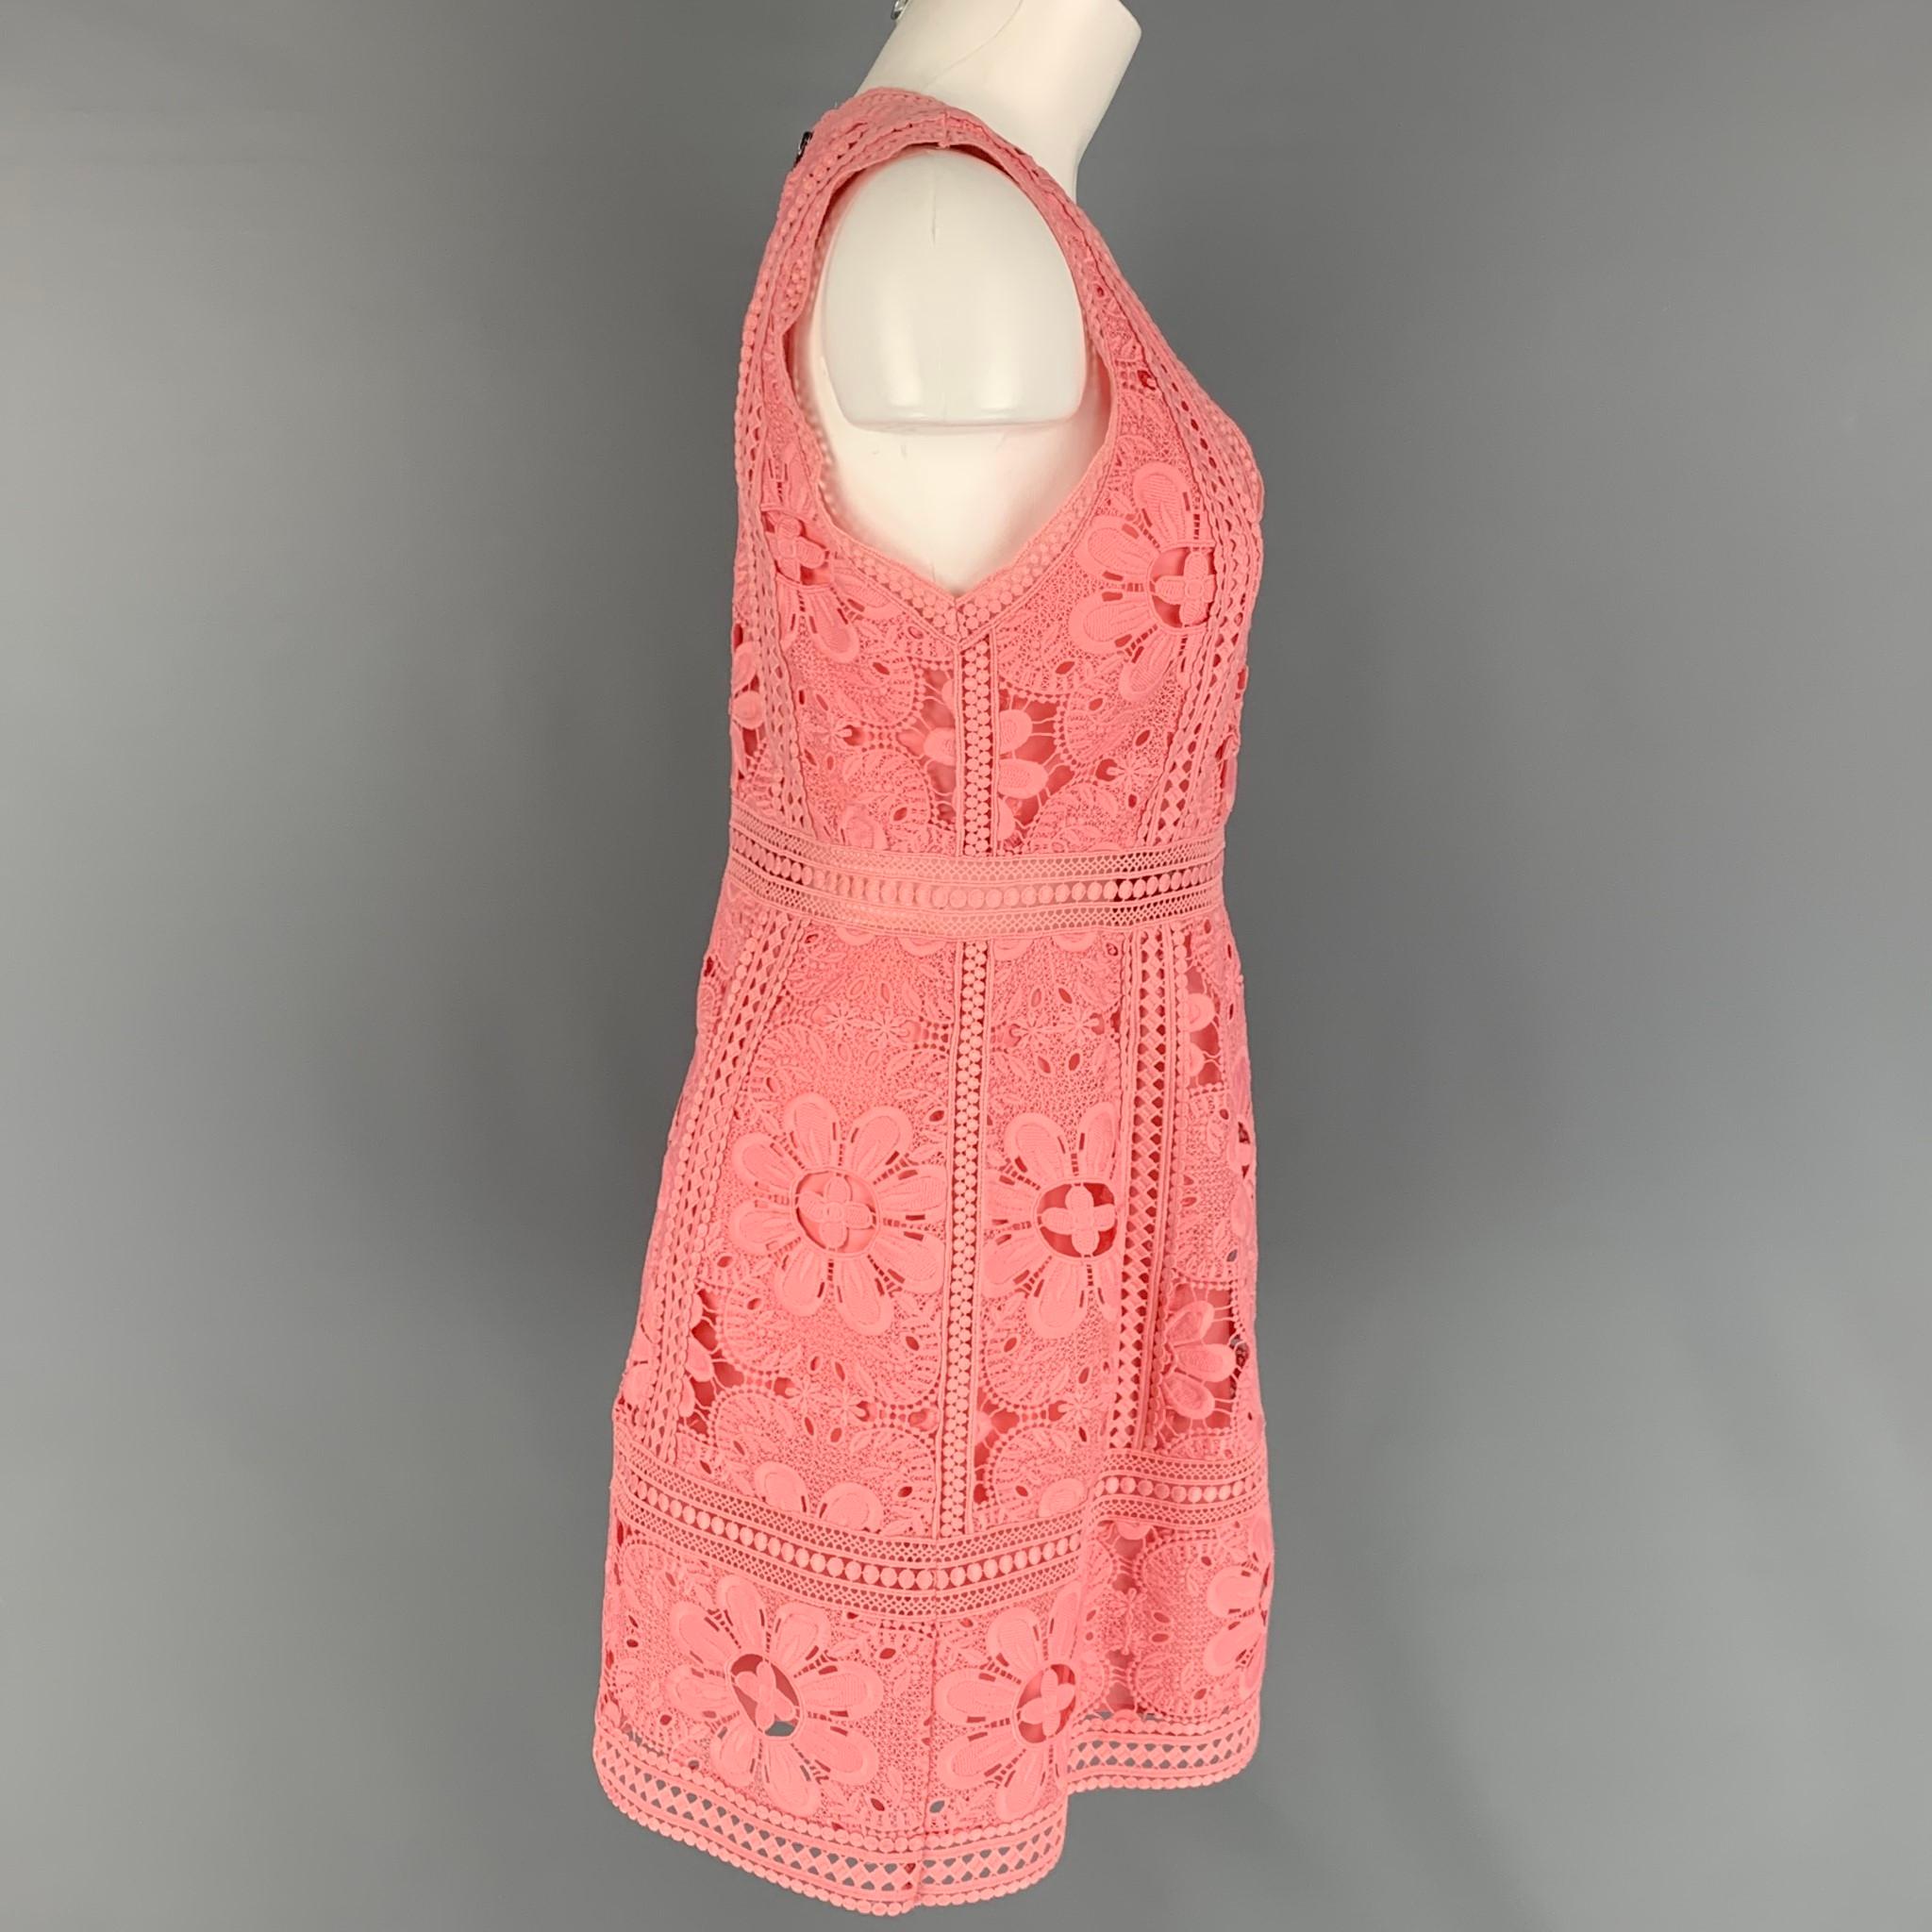 ALICE + OLIVIA dress comes in a rose pink lace polyester with a slip liner featuring an a-line style, v-neck, and a back zip up closure. 

Very Good Pre-Owned Condition.
Marked: 6

Measurements:

Shoulder: 13 in.
Bust: 32 in.
Waist: 28 in.
Hip: 38